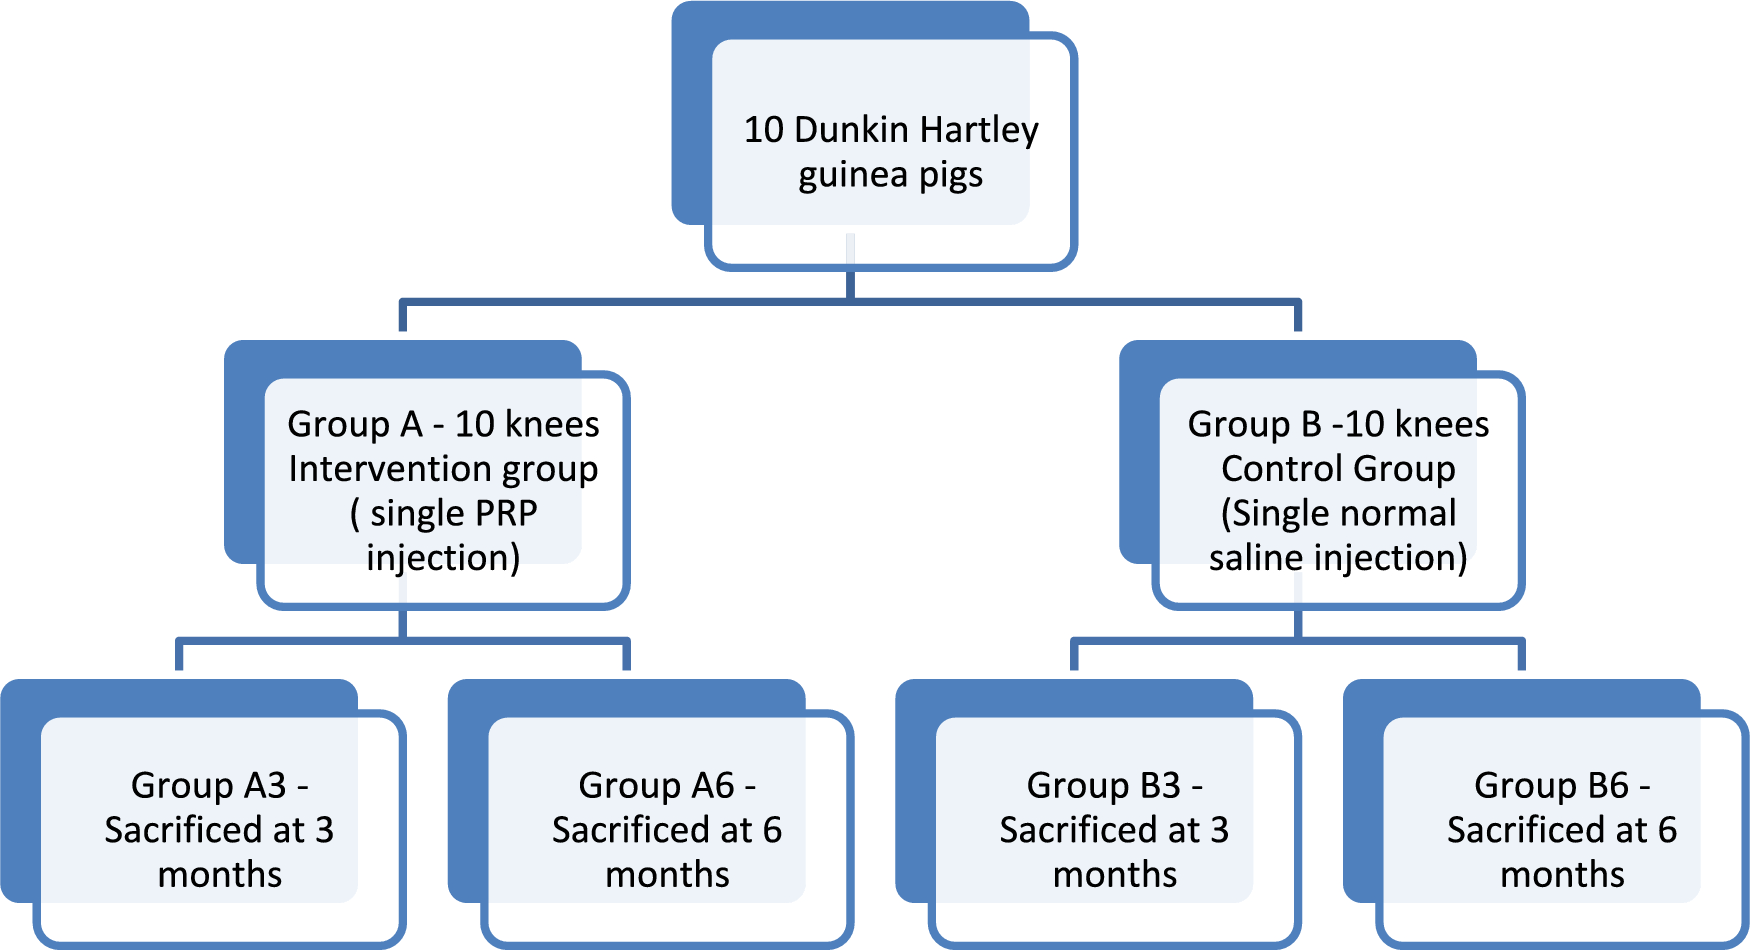 Chondroprotective Effects of a Single PRP Injection in a Spontaneous Osteoarthritis Model of Dunkin Hartley Guinea Pig: An Immunohistochemical Analysis